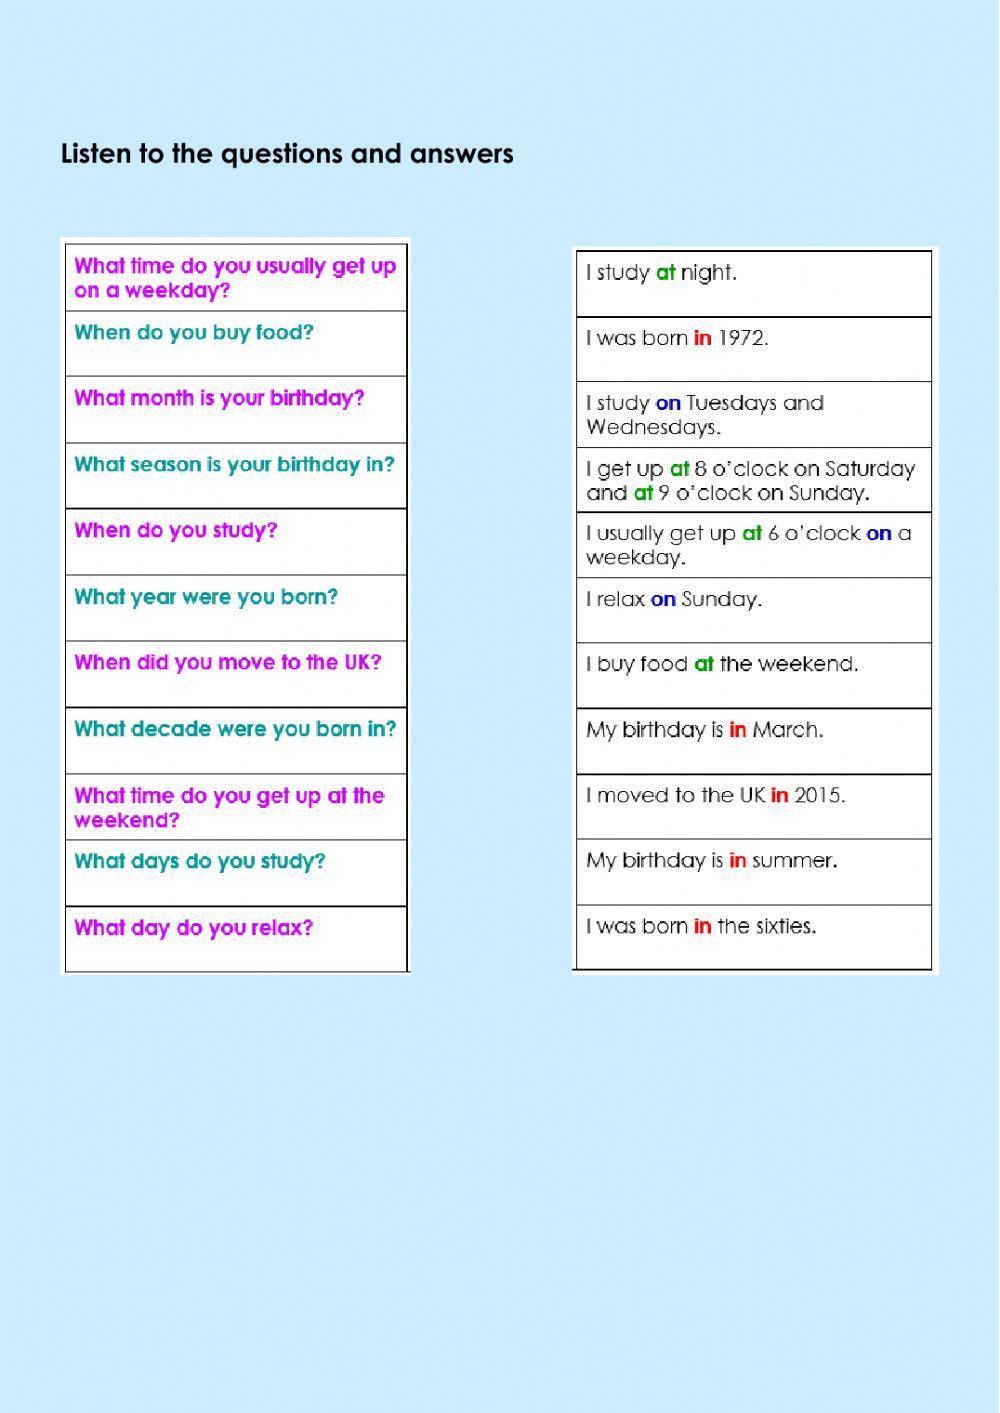 Preposition of time questions